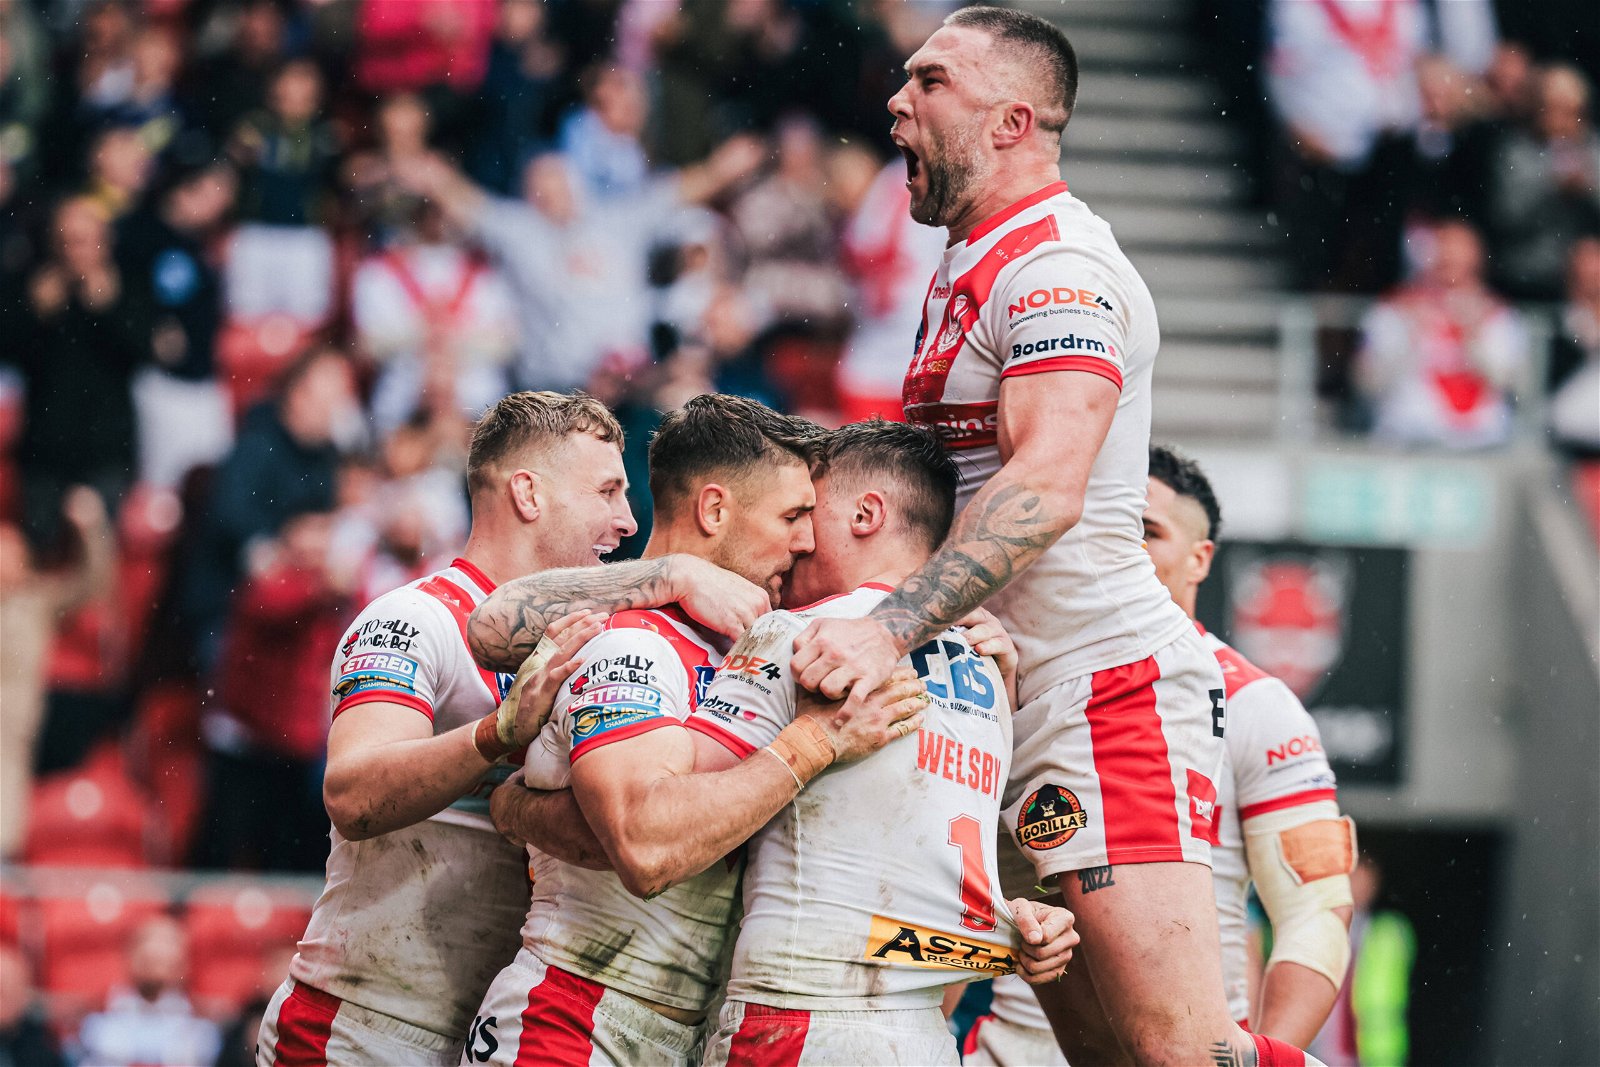 St Helens player Tommy Makinson celebrates after scoring a try.